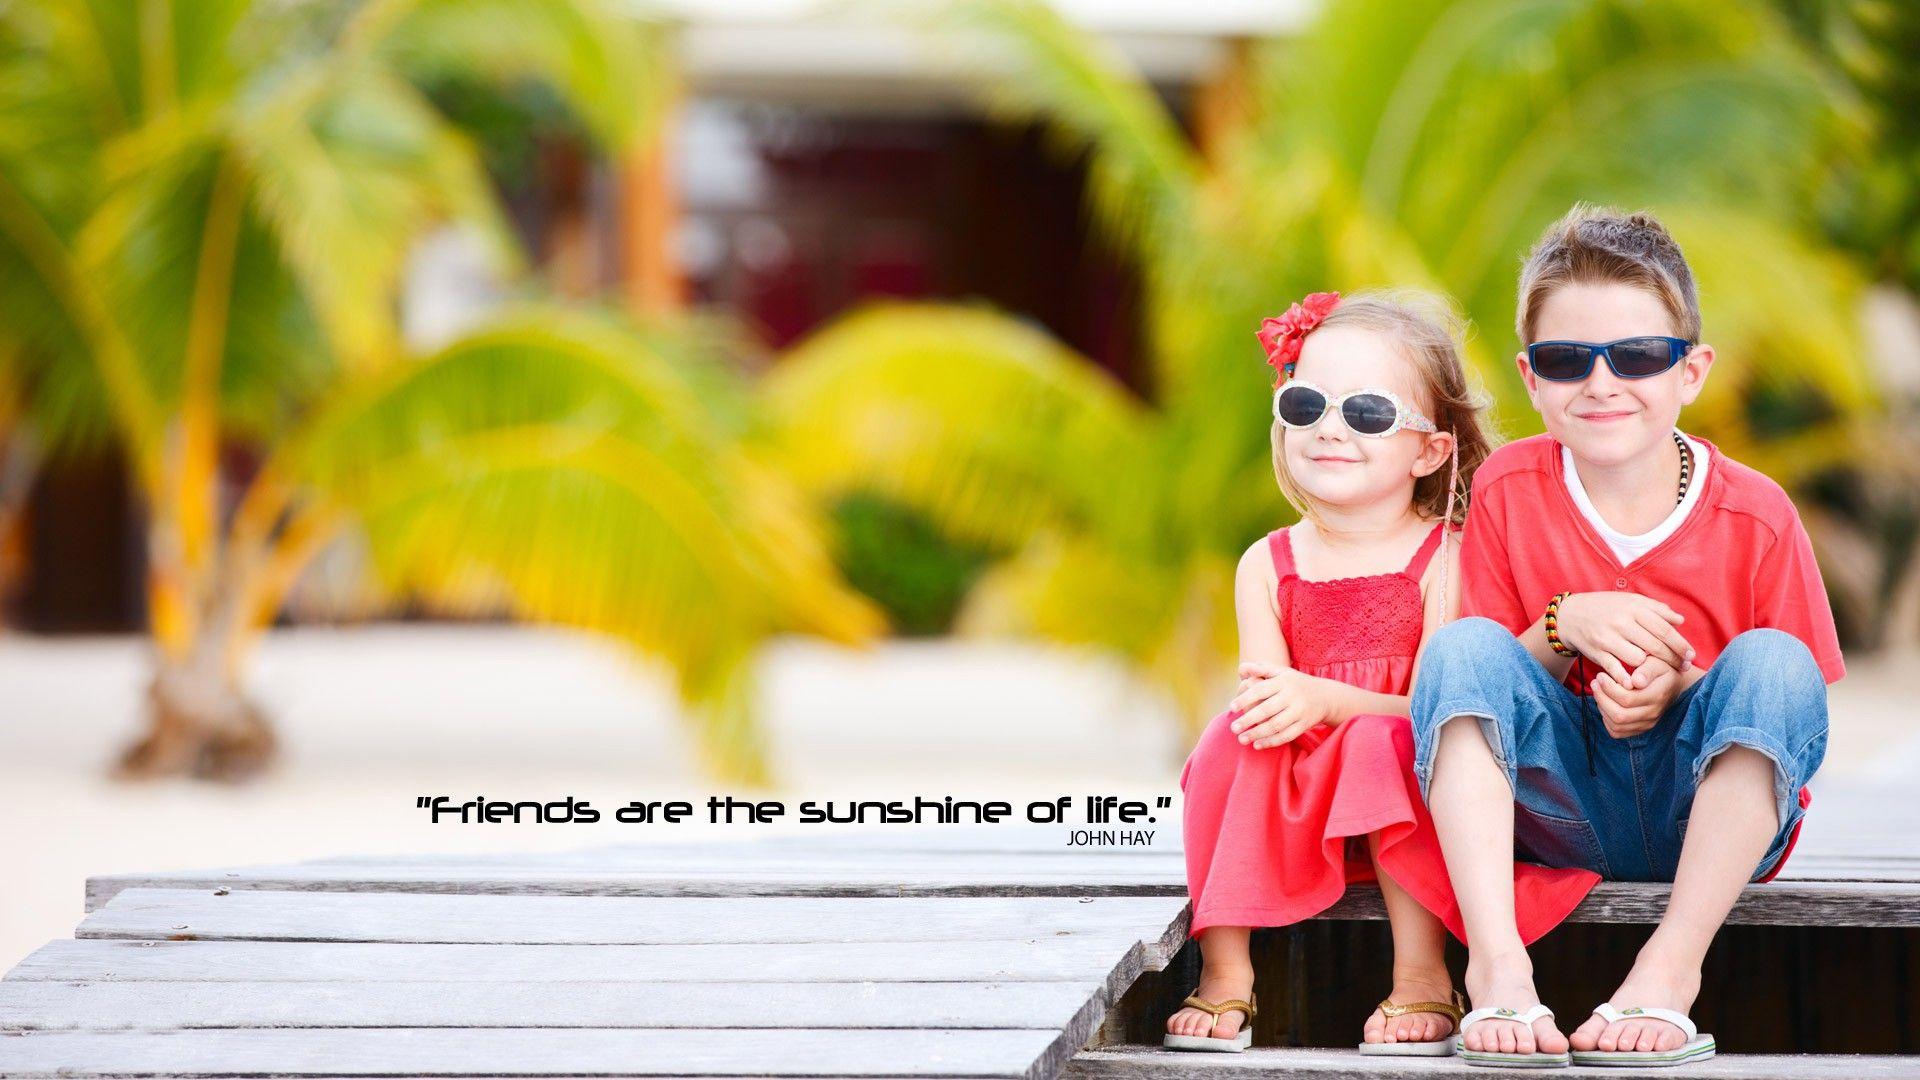 Friend Are The Sunshine Of Life HD Wallpaper HD